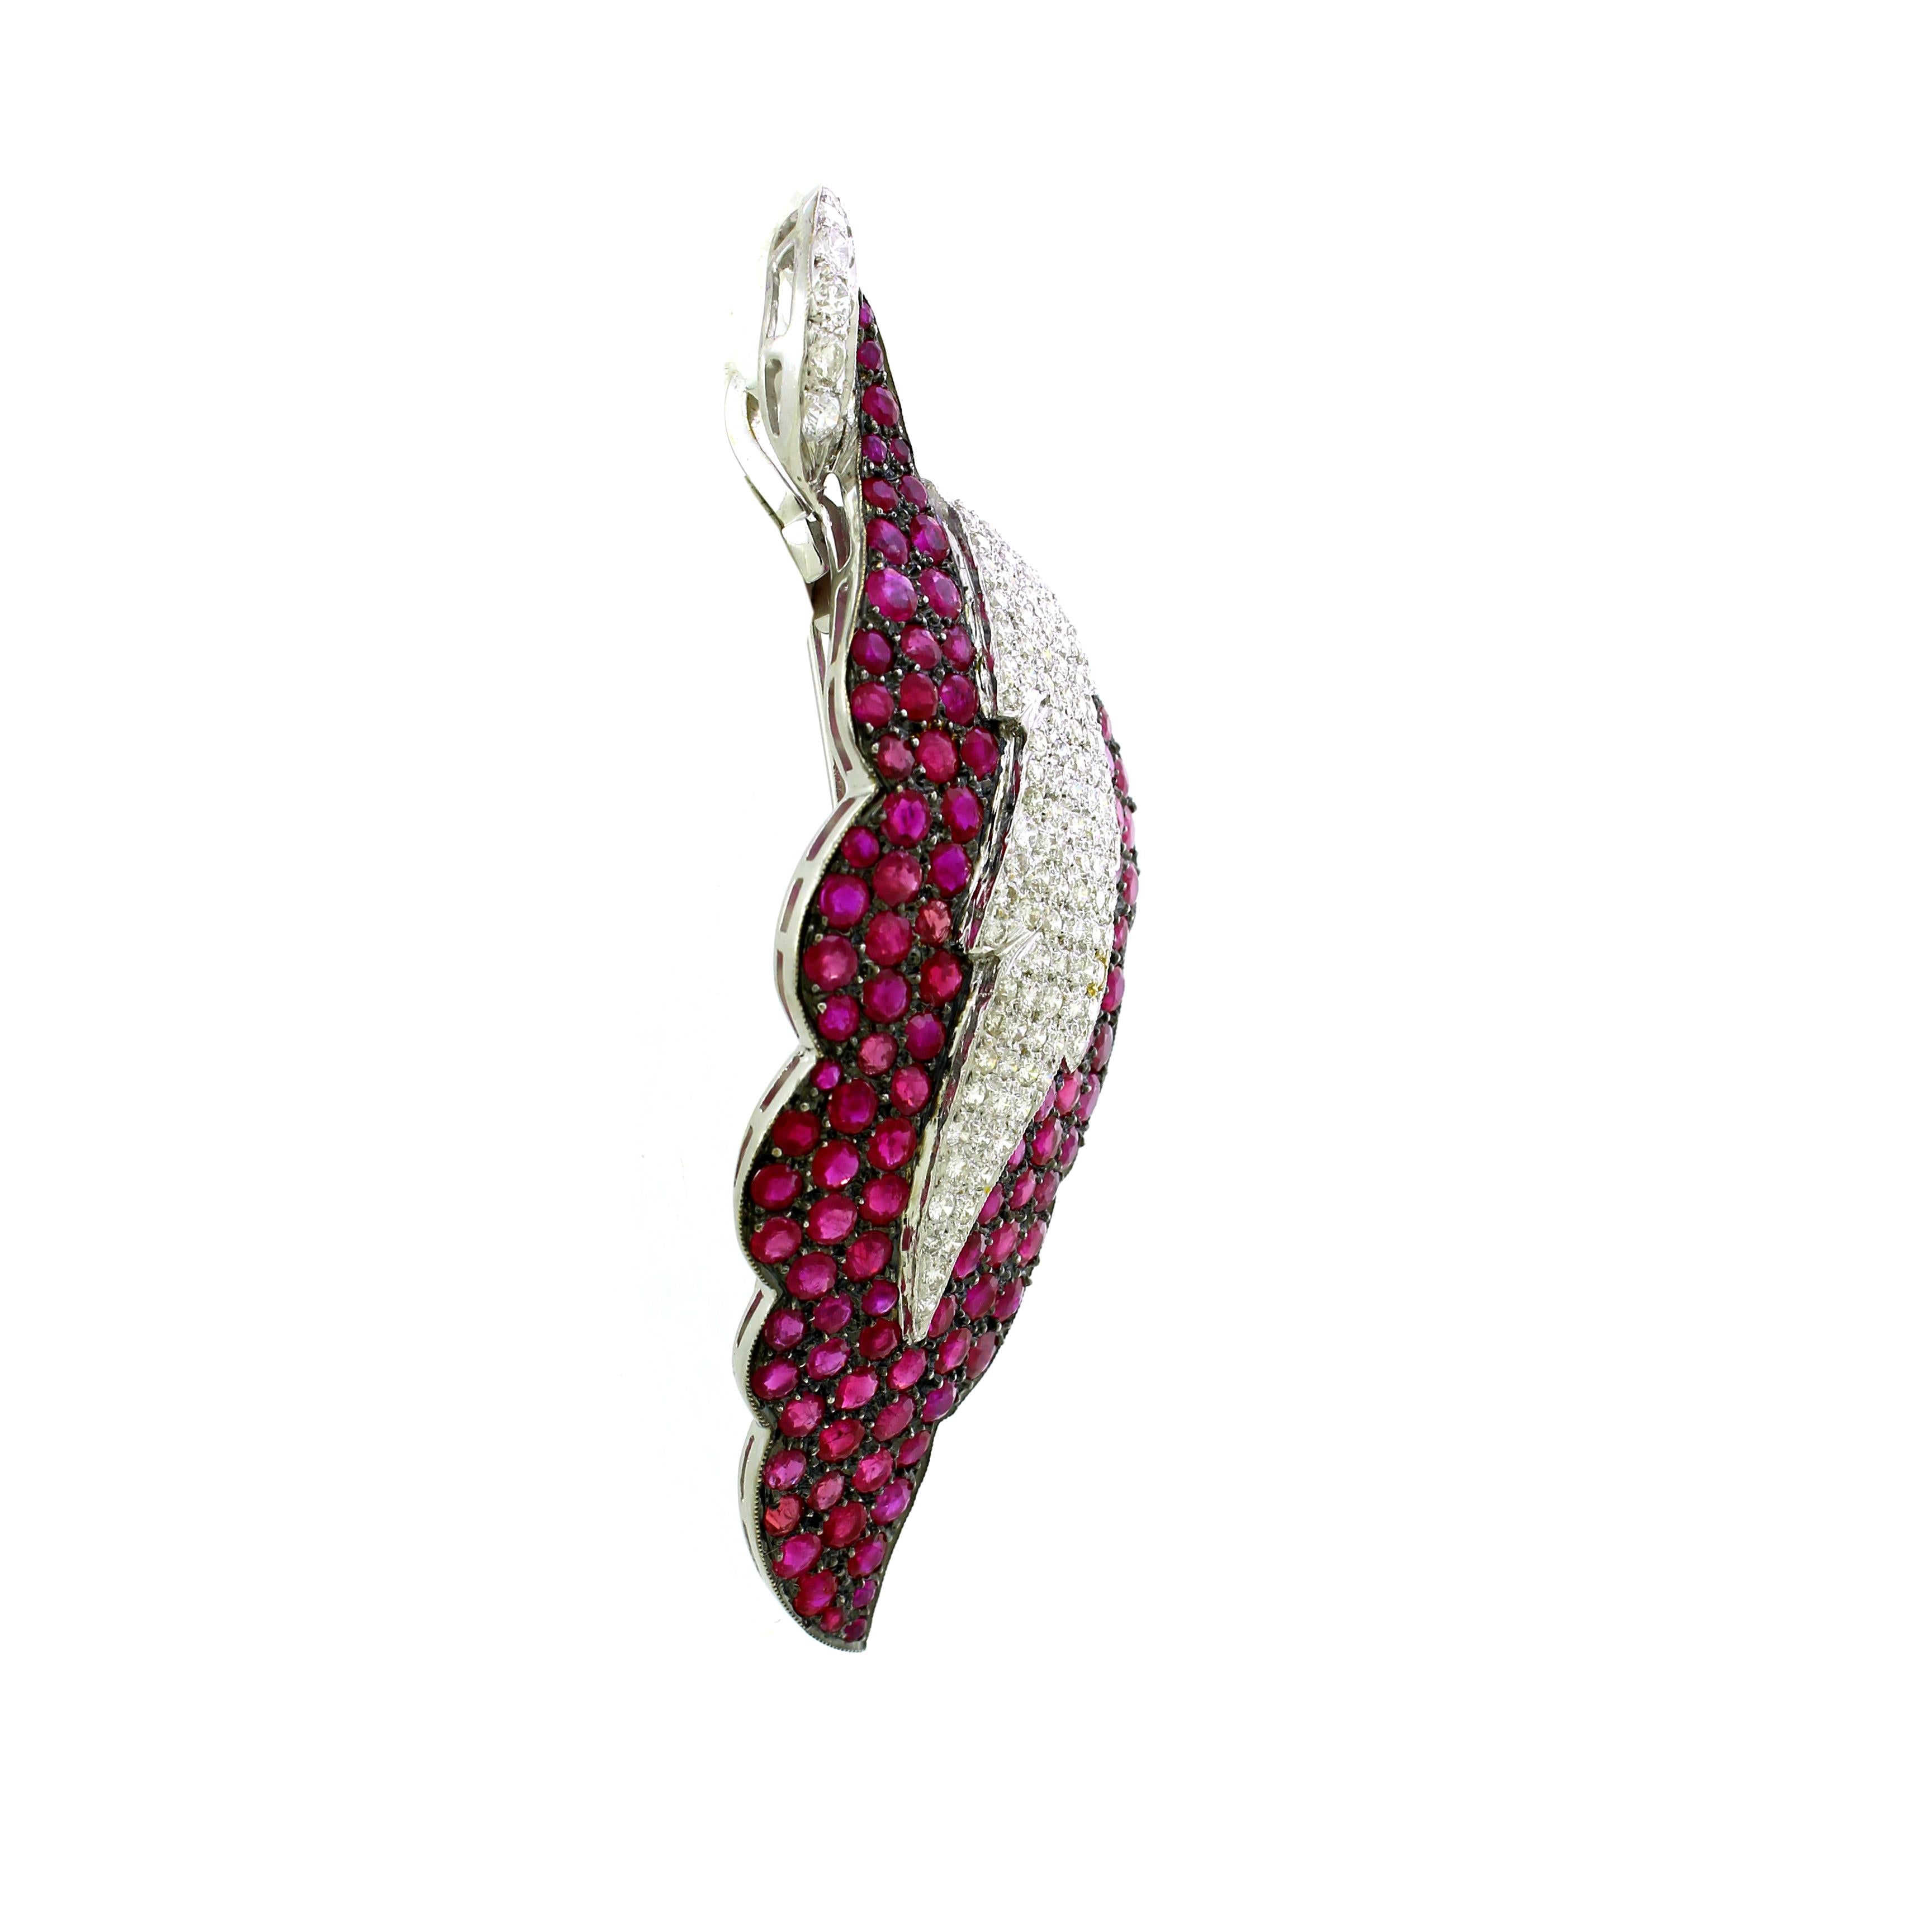 Embrace the organic elegance of nature with our exquisite leaf-inspired pendant, where the graceful twists and turns of a leaf are brought to life in breathtaking detail. Crafted with meticulous artistry, this pendant features a lush array of